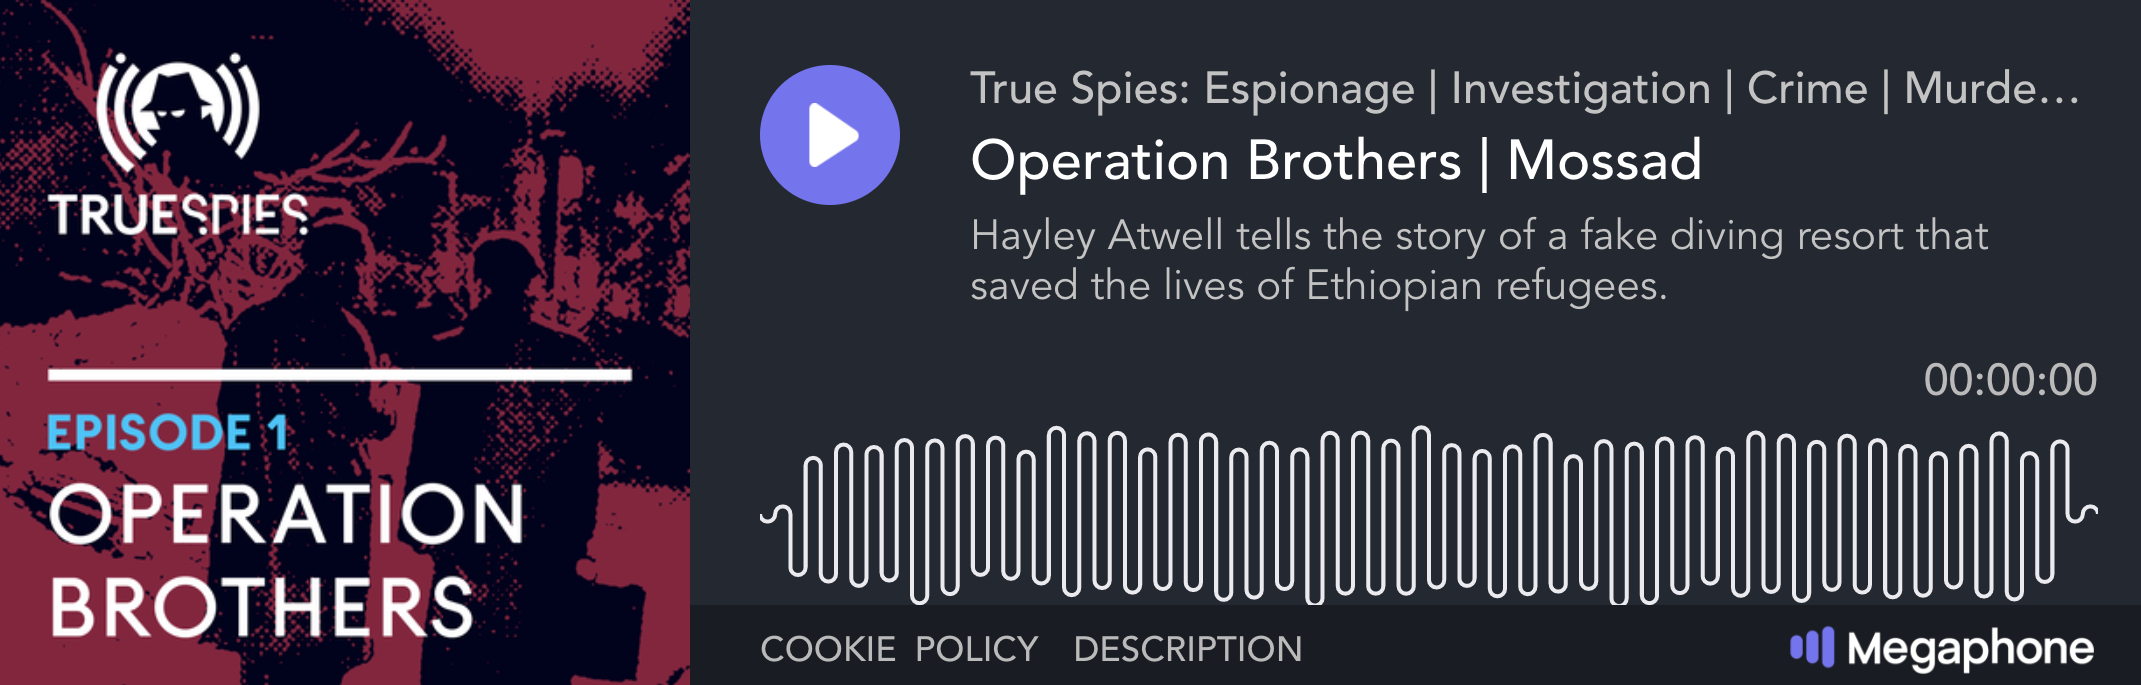 True Spies: Operation Brothers podcast